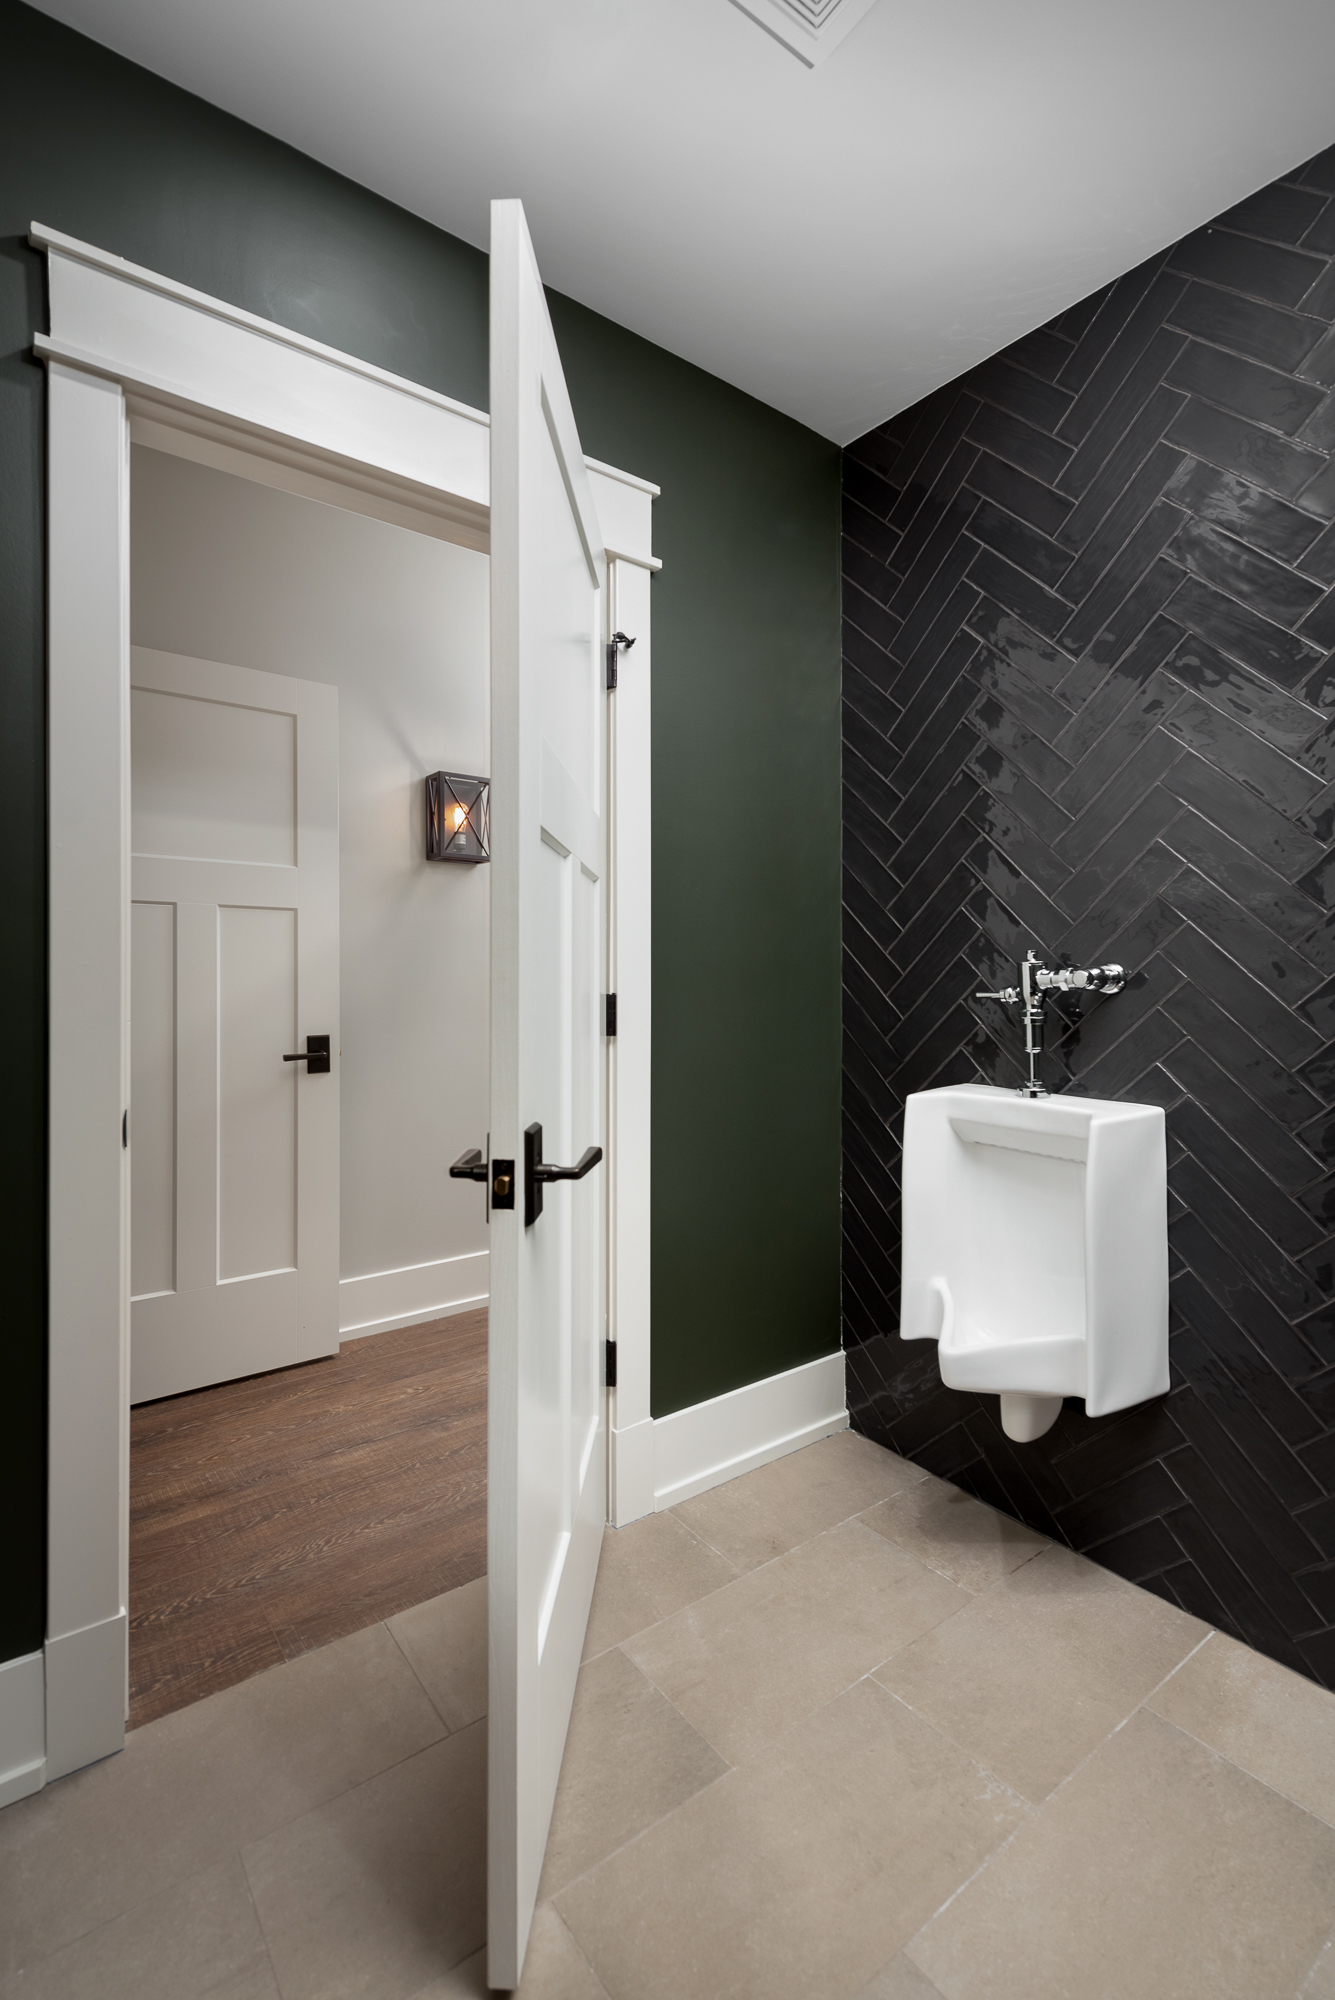 Urinal in basement powder room with black herringbone wall tile and green walls. Designed by LC Interiors in Naperville, IL.